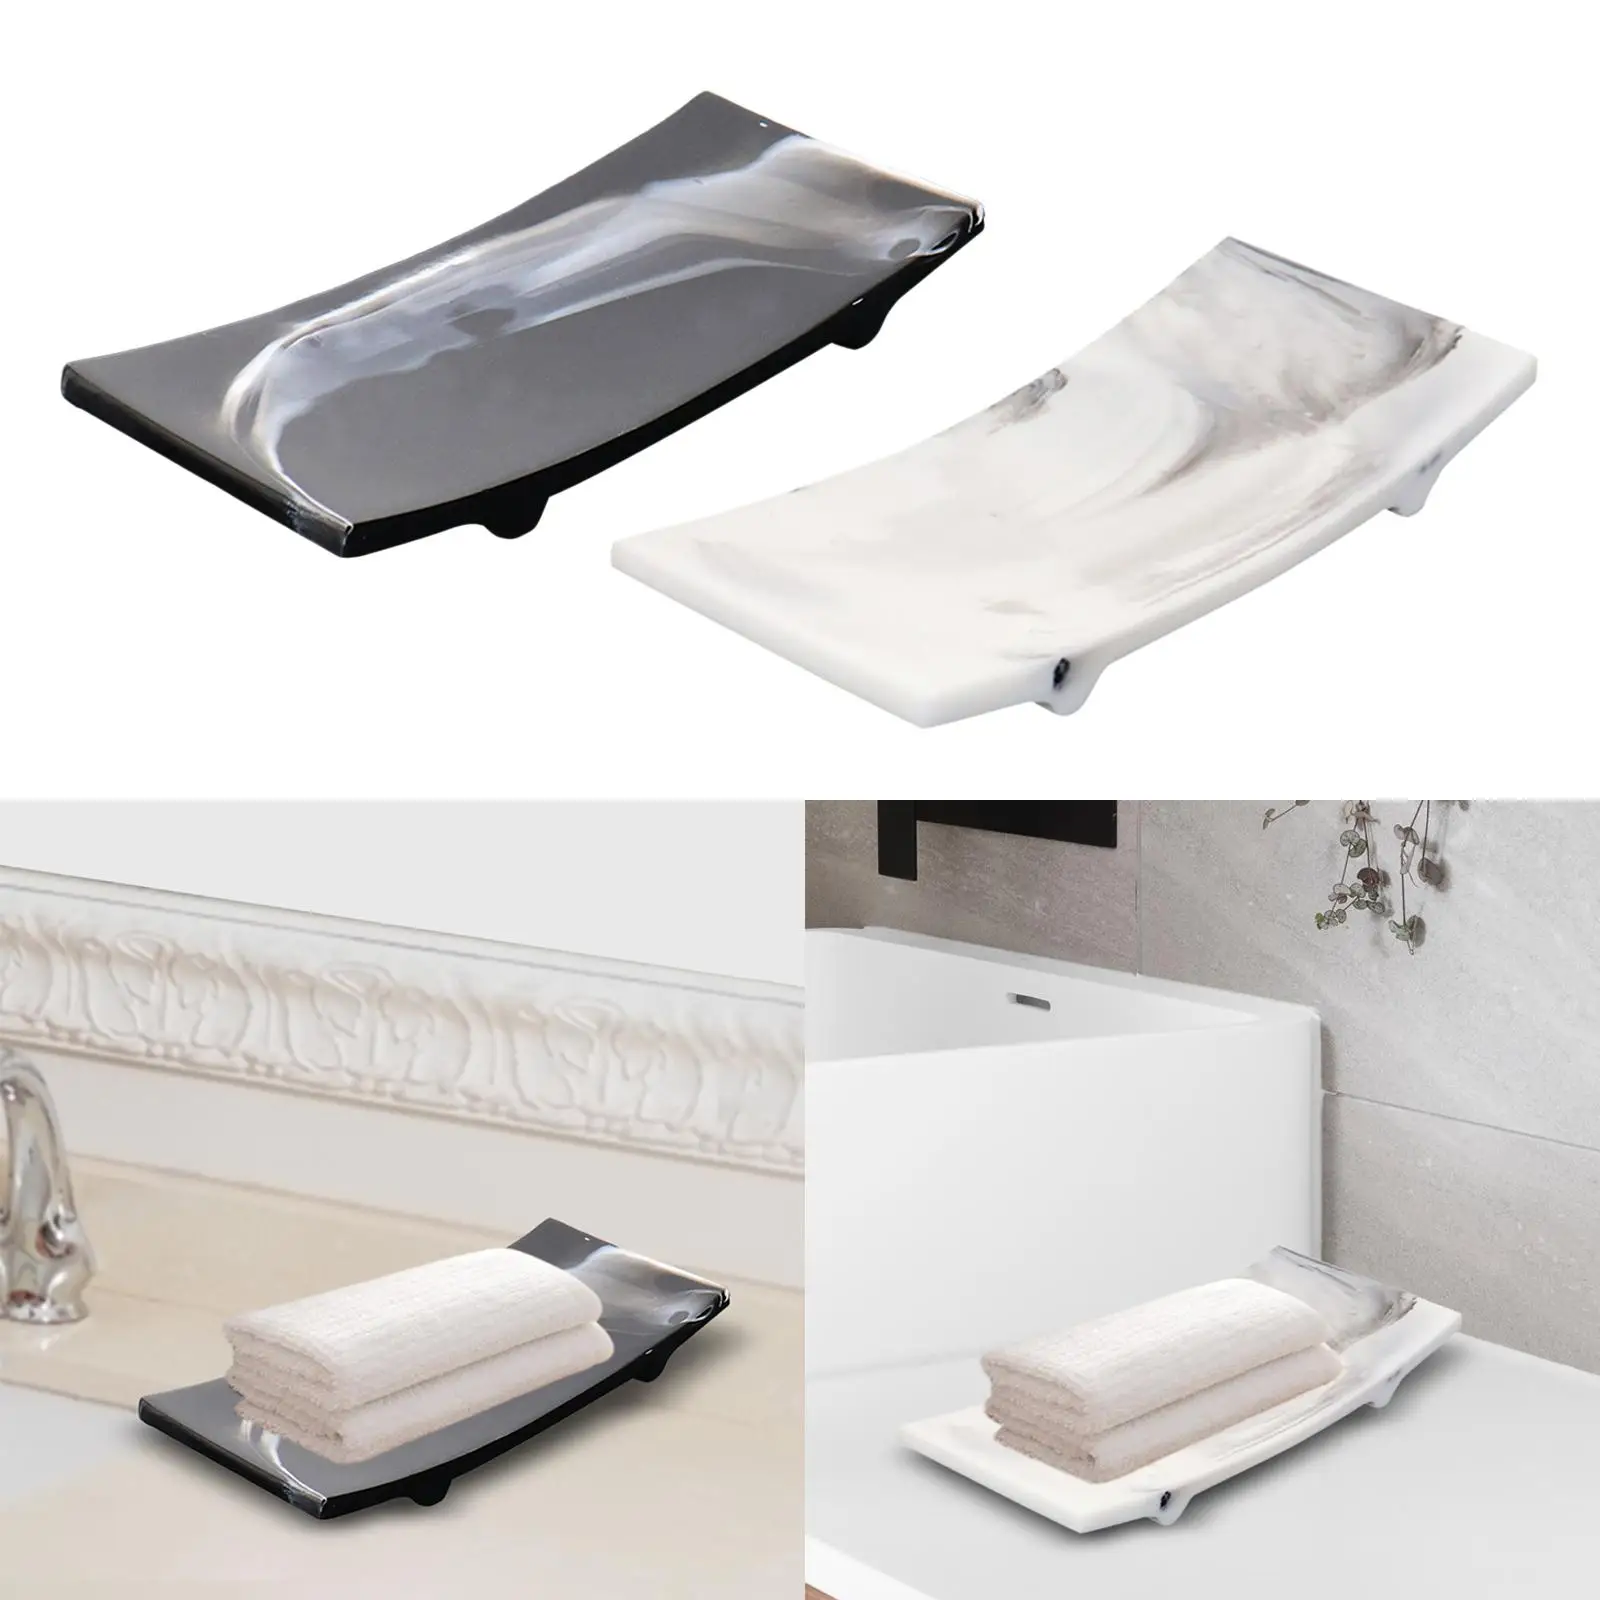 Resin Decorative Tray Bathroom Tray Towel Perfume Holder Durable for Coffee Table Elegant Design Practical Gift Trinket Tray